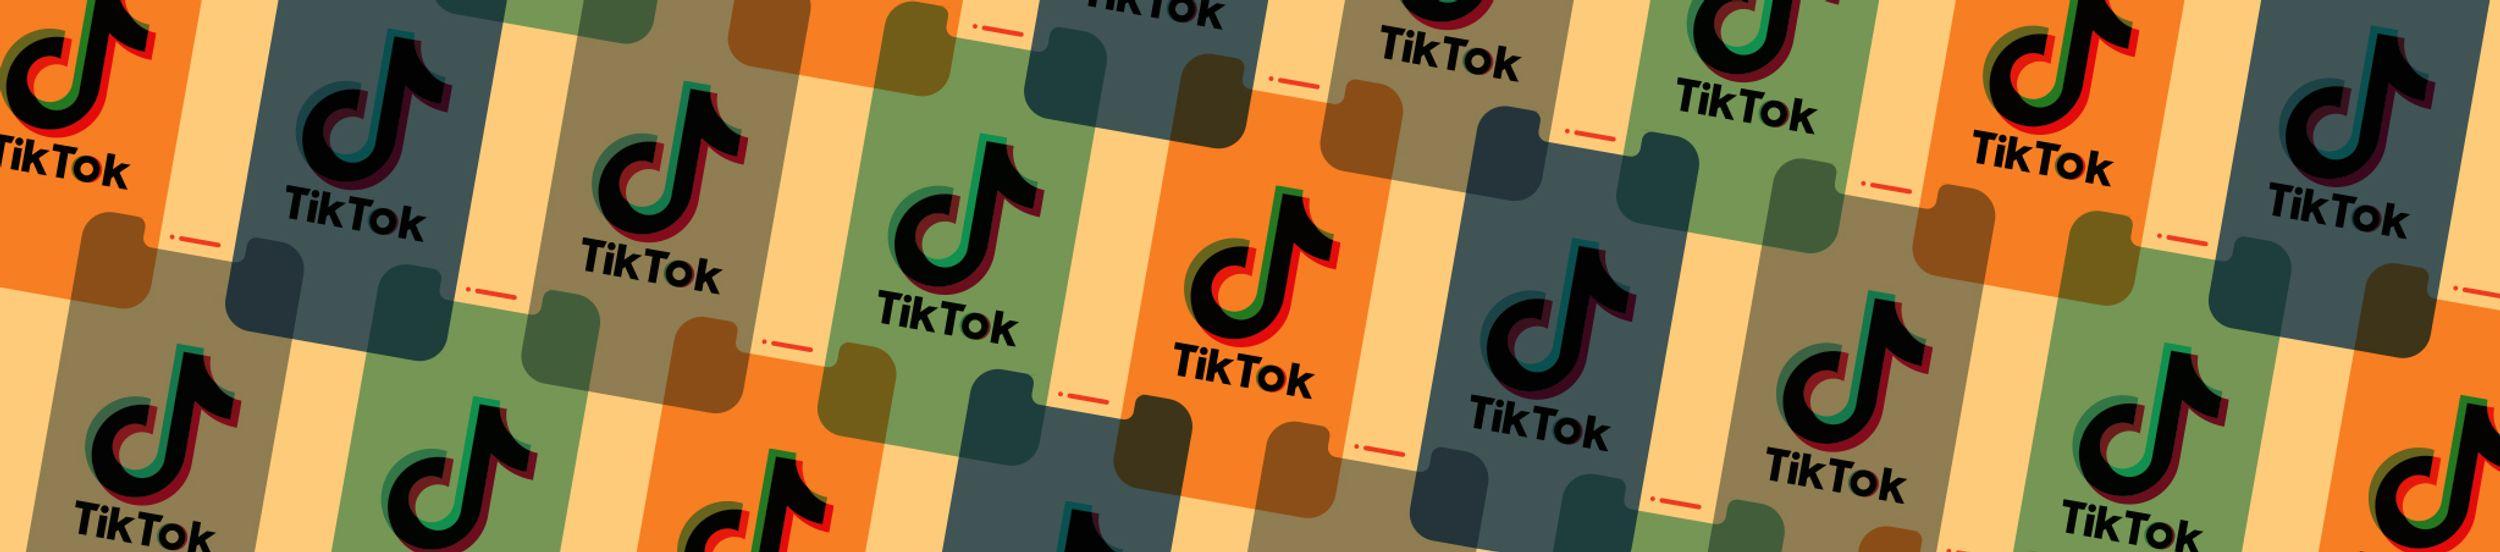 TikTok for Real Estate and Property Marketing